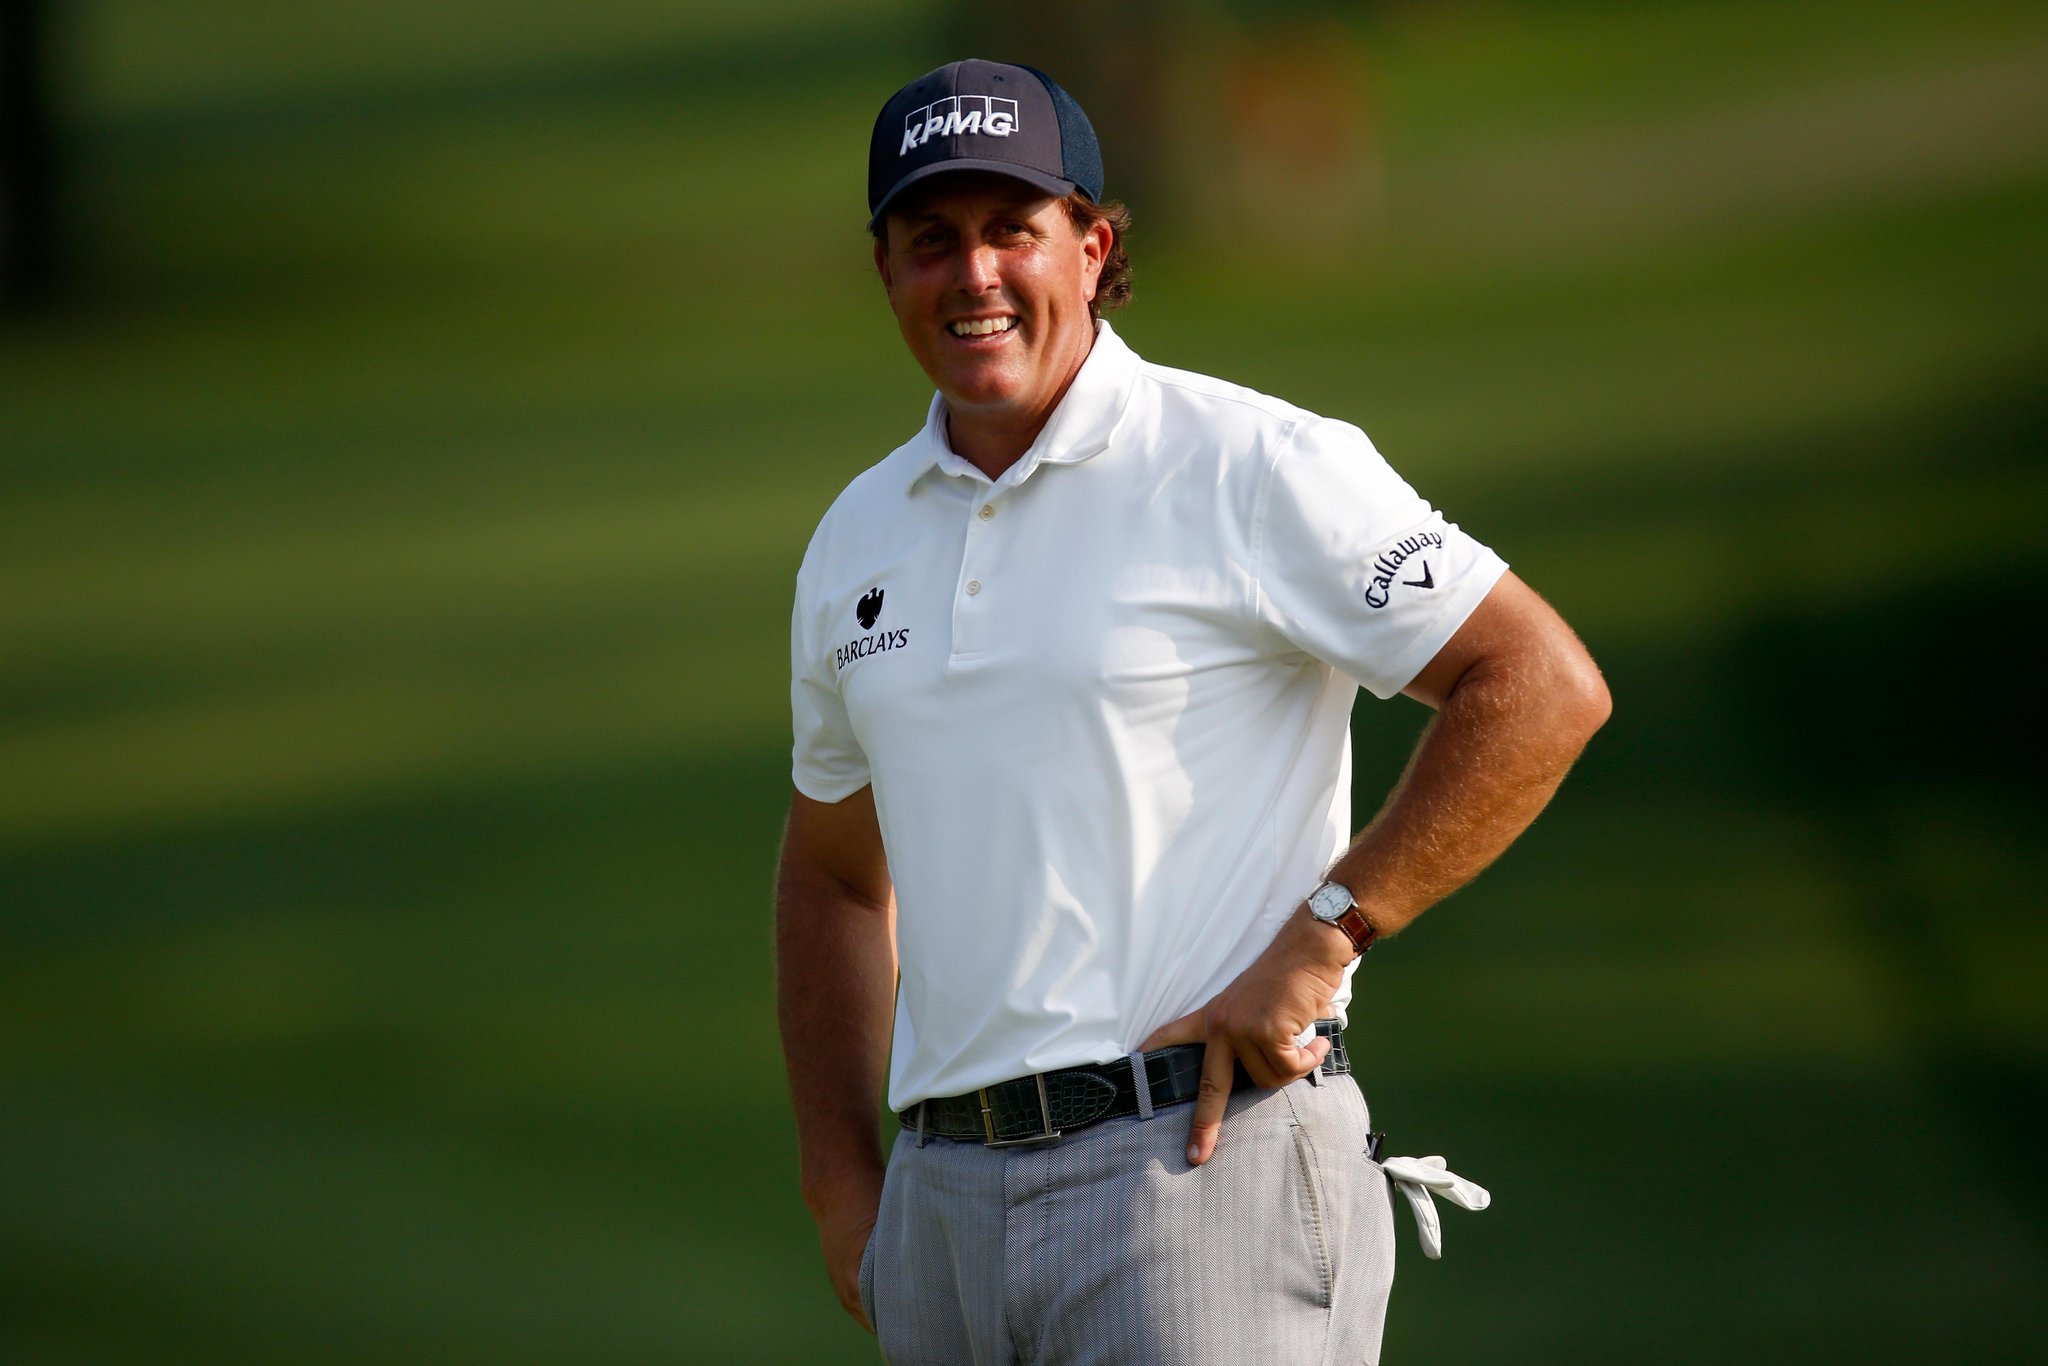 Join us in wishing a happy birthday to Phil Mickelson, who is qualified to make the Bridgestone Invitational field! 